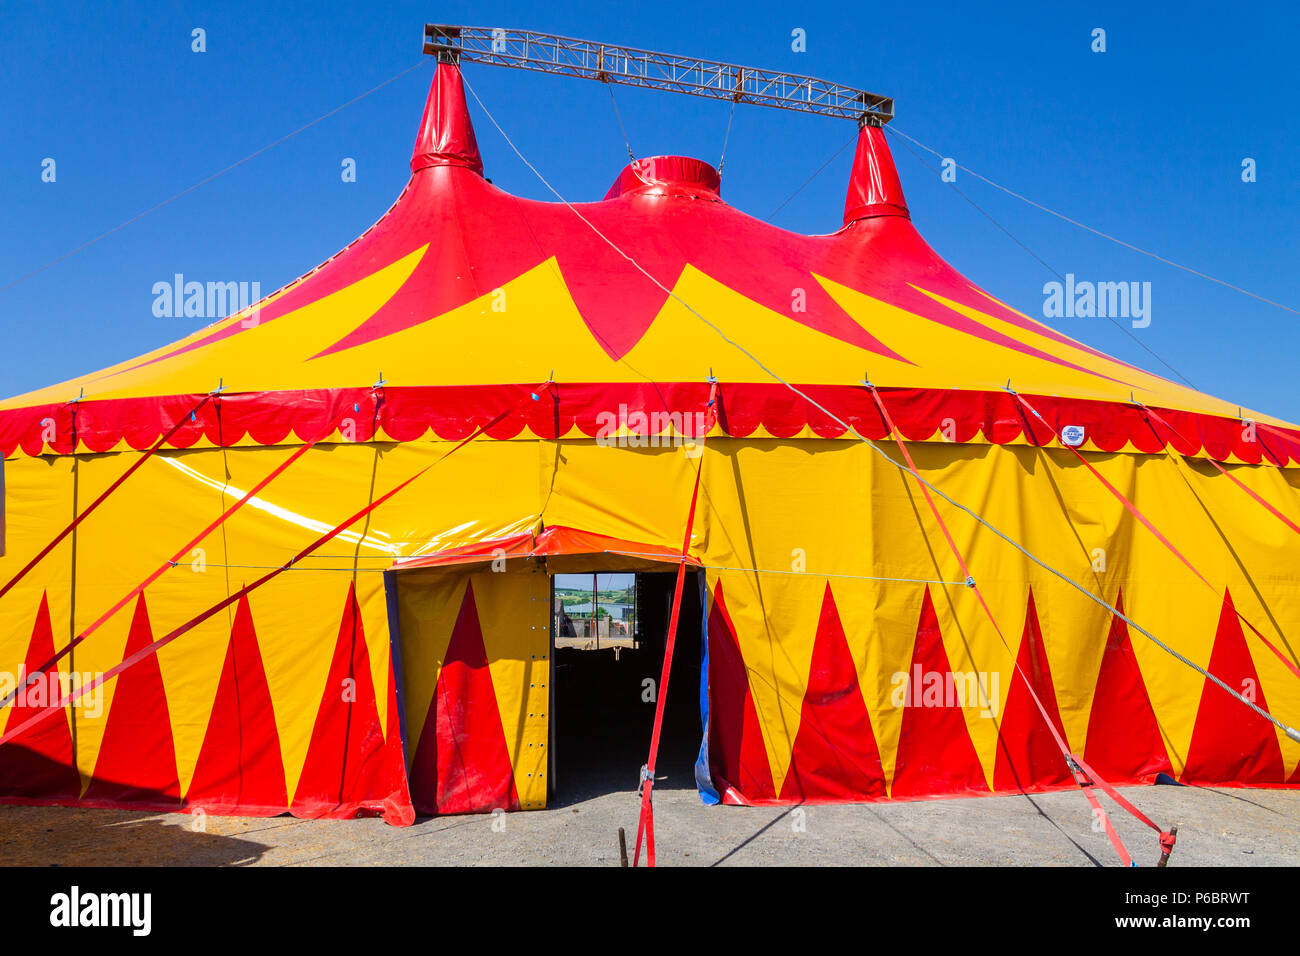 Circus tent or big top with red and yellow design standing out against a clear blue sky. Stock Photo